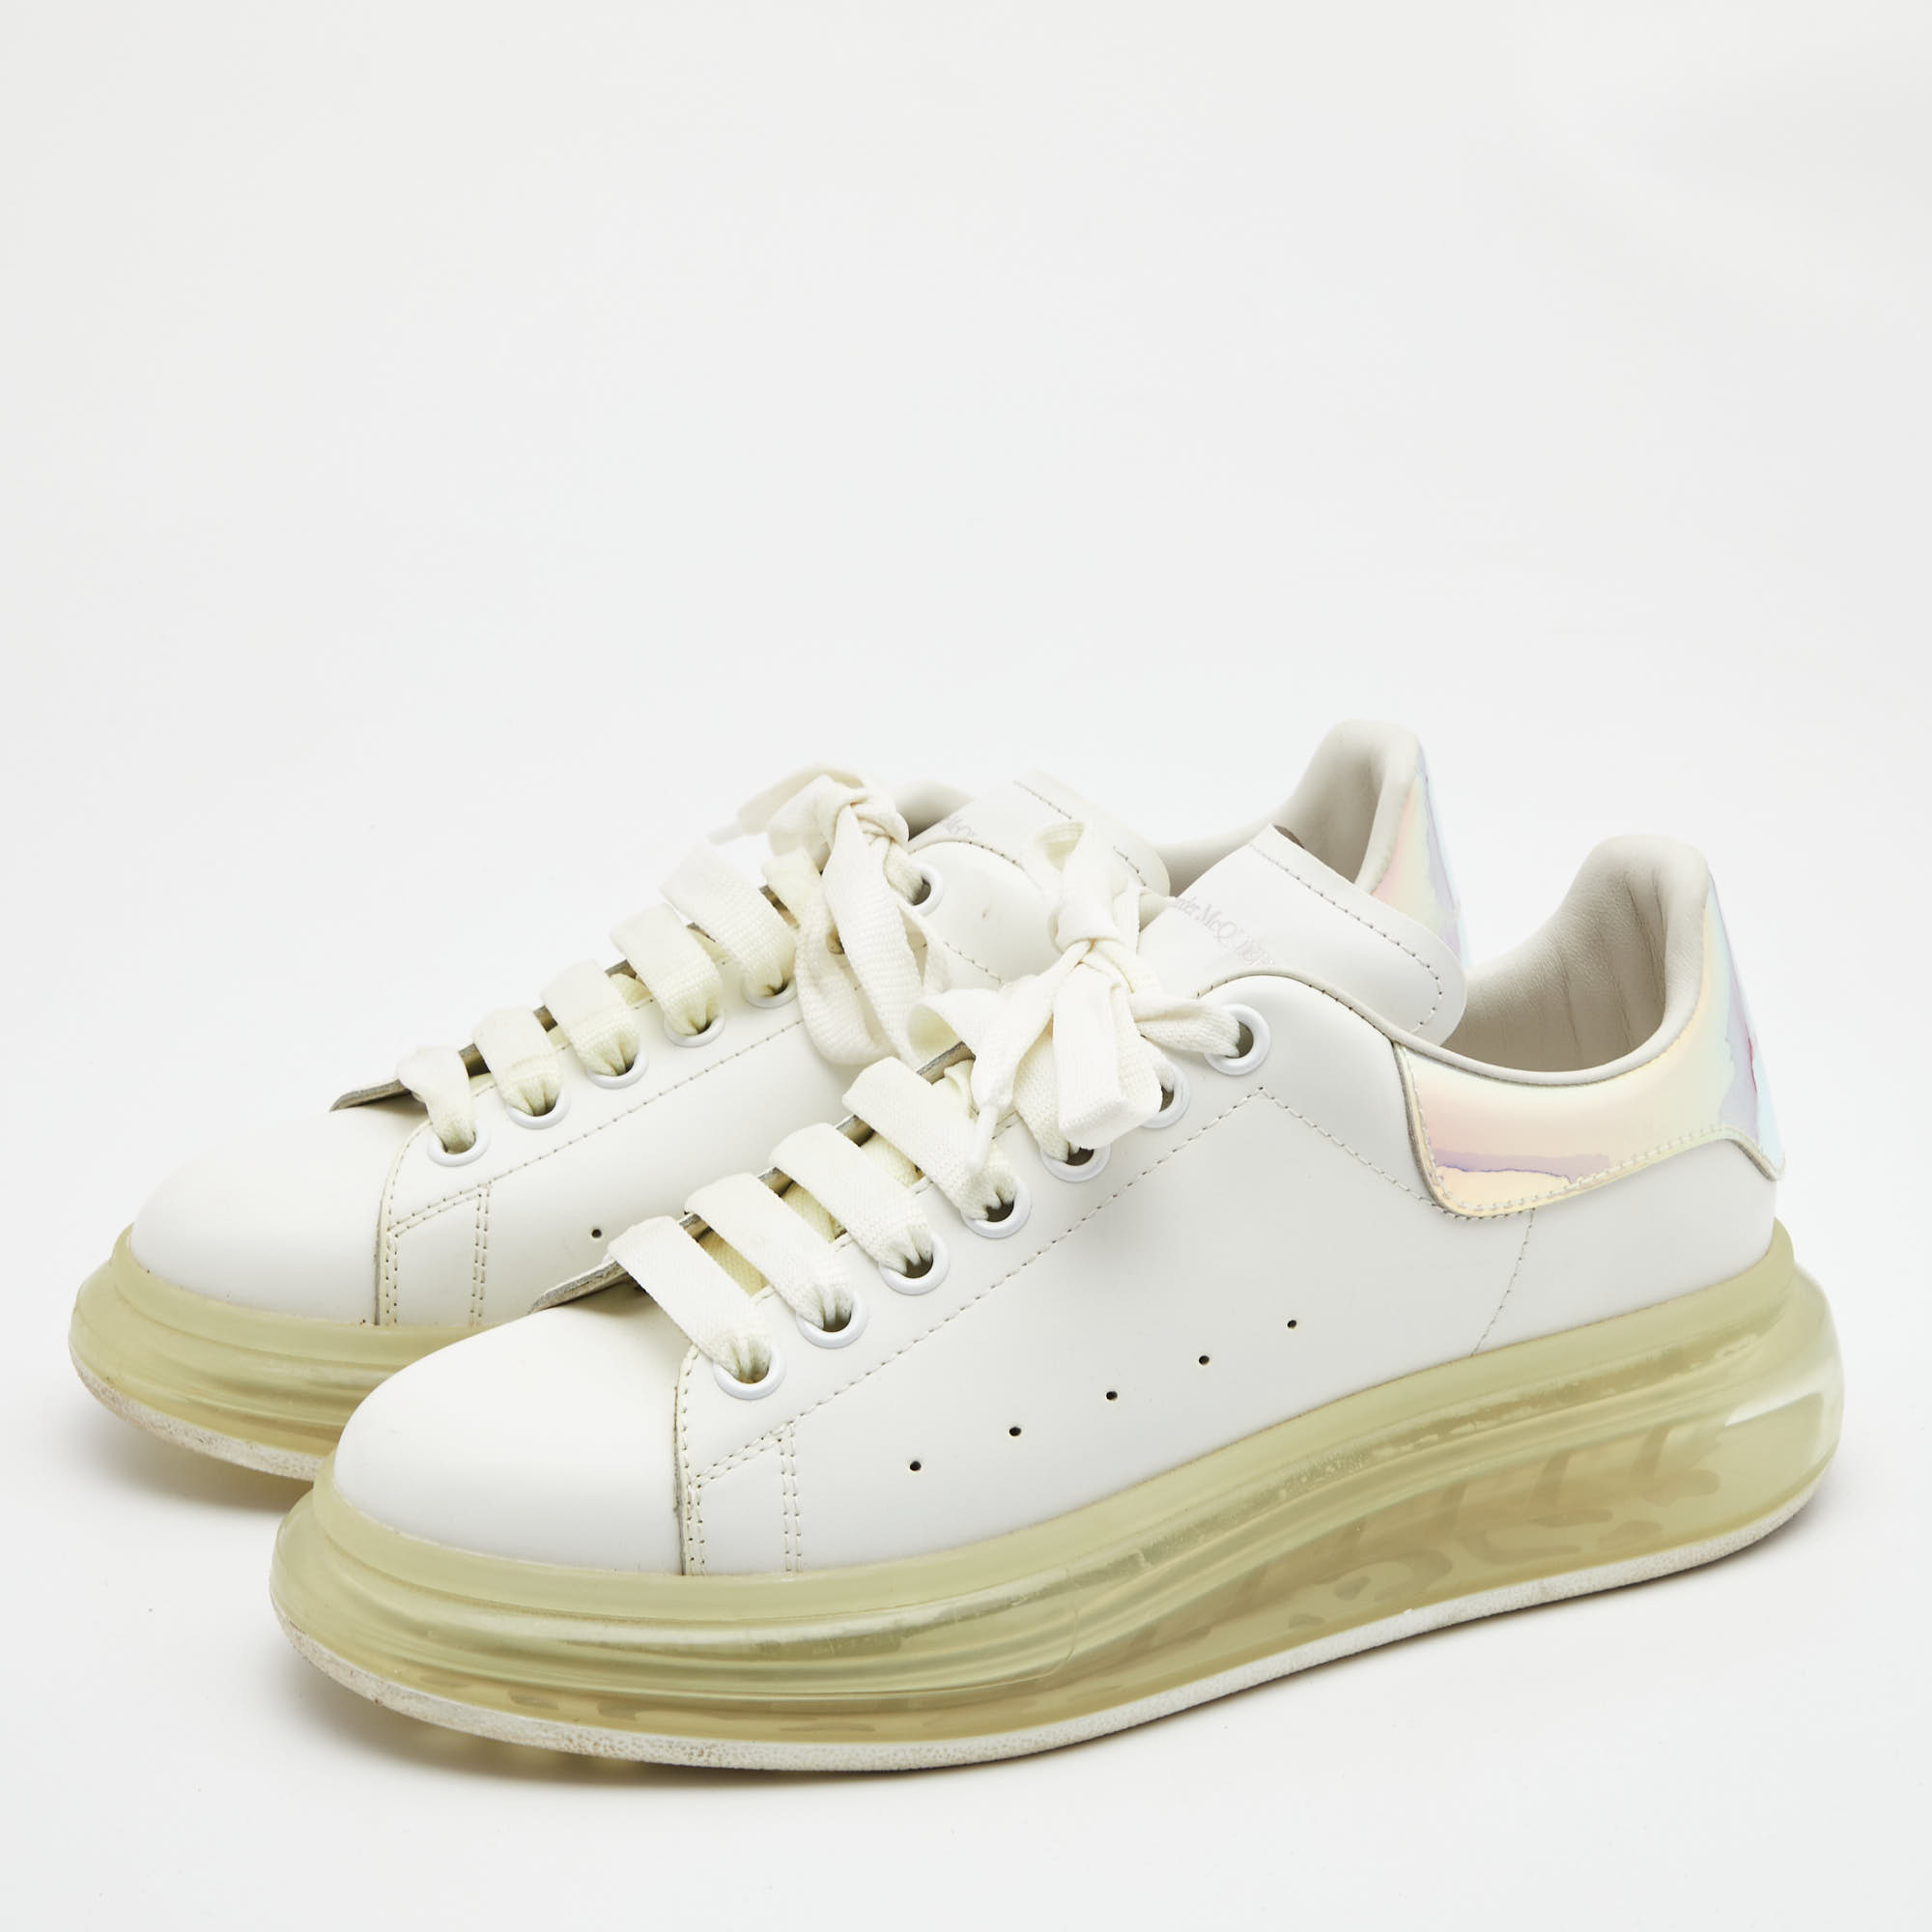 

Alexander McQueen White Leather and Iridescent Oversized Sneakers Size